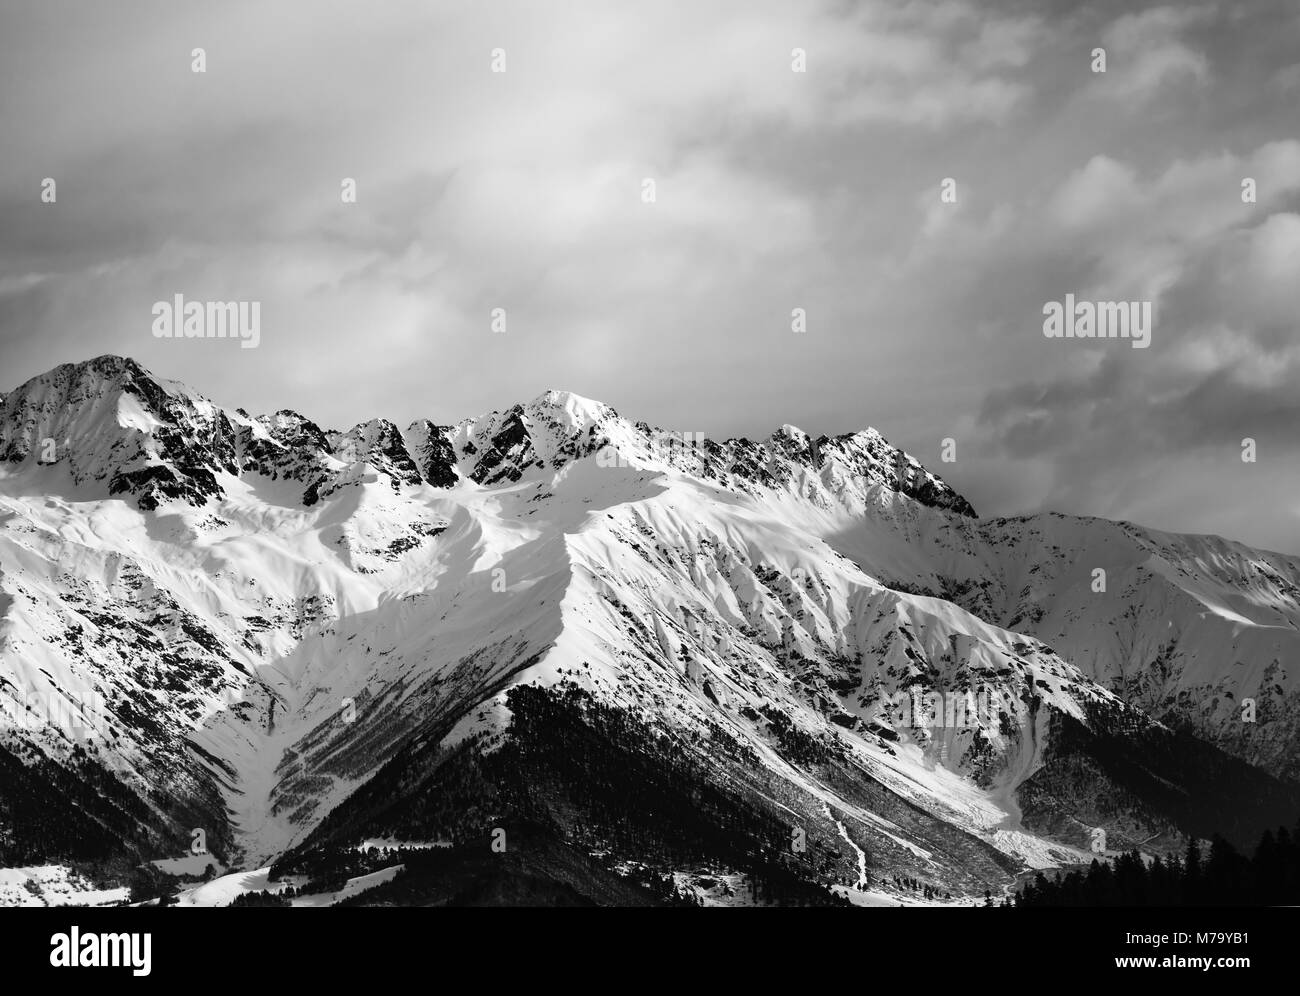 Snowy winter mountain and cloudy sky in evening. Caucasus Mountains. Svaneti region of Georgia. Black and white toned landscape. Stock Photo